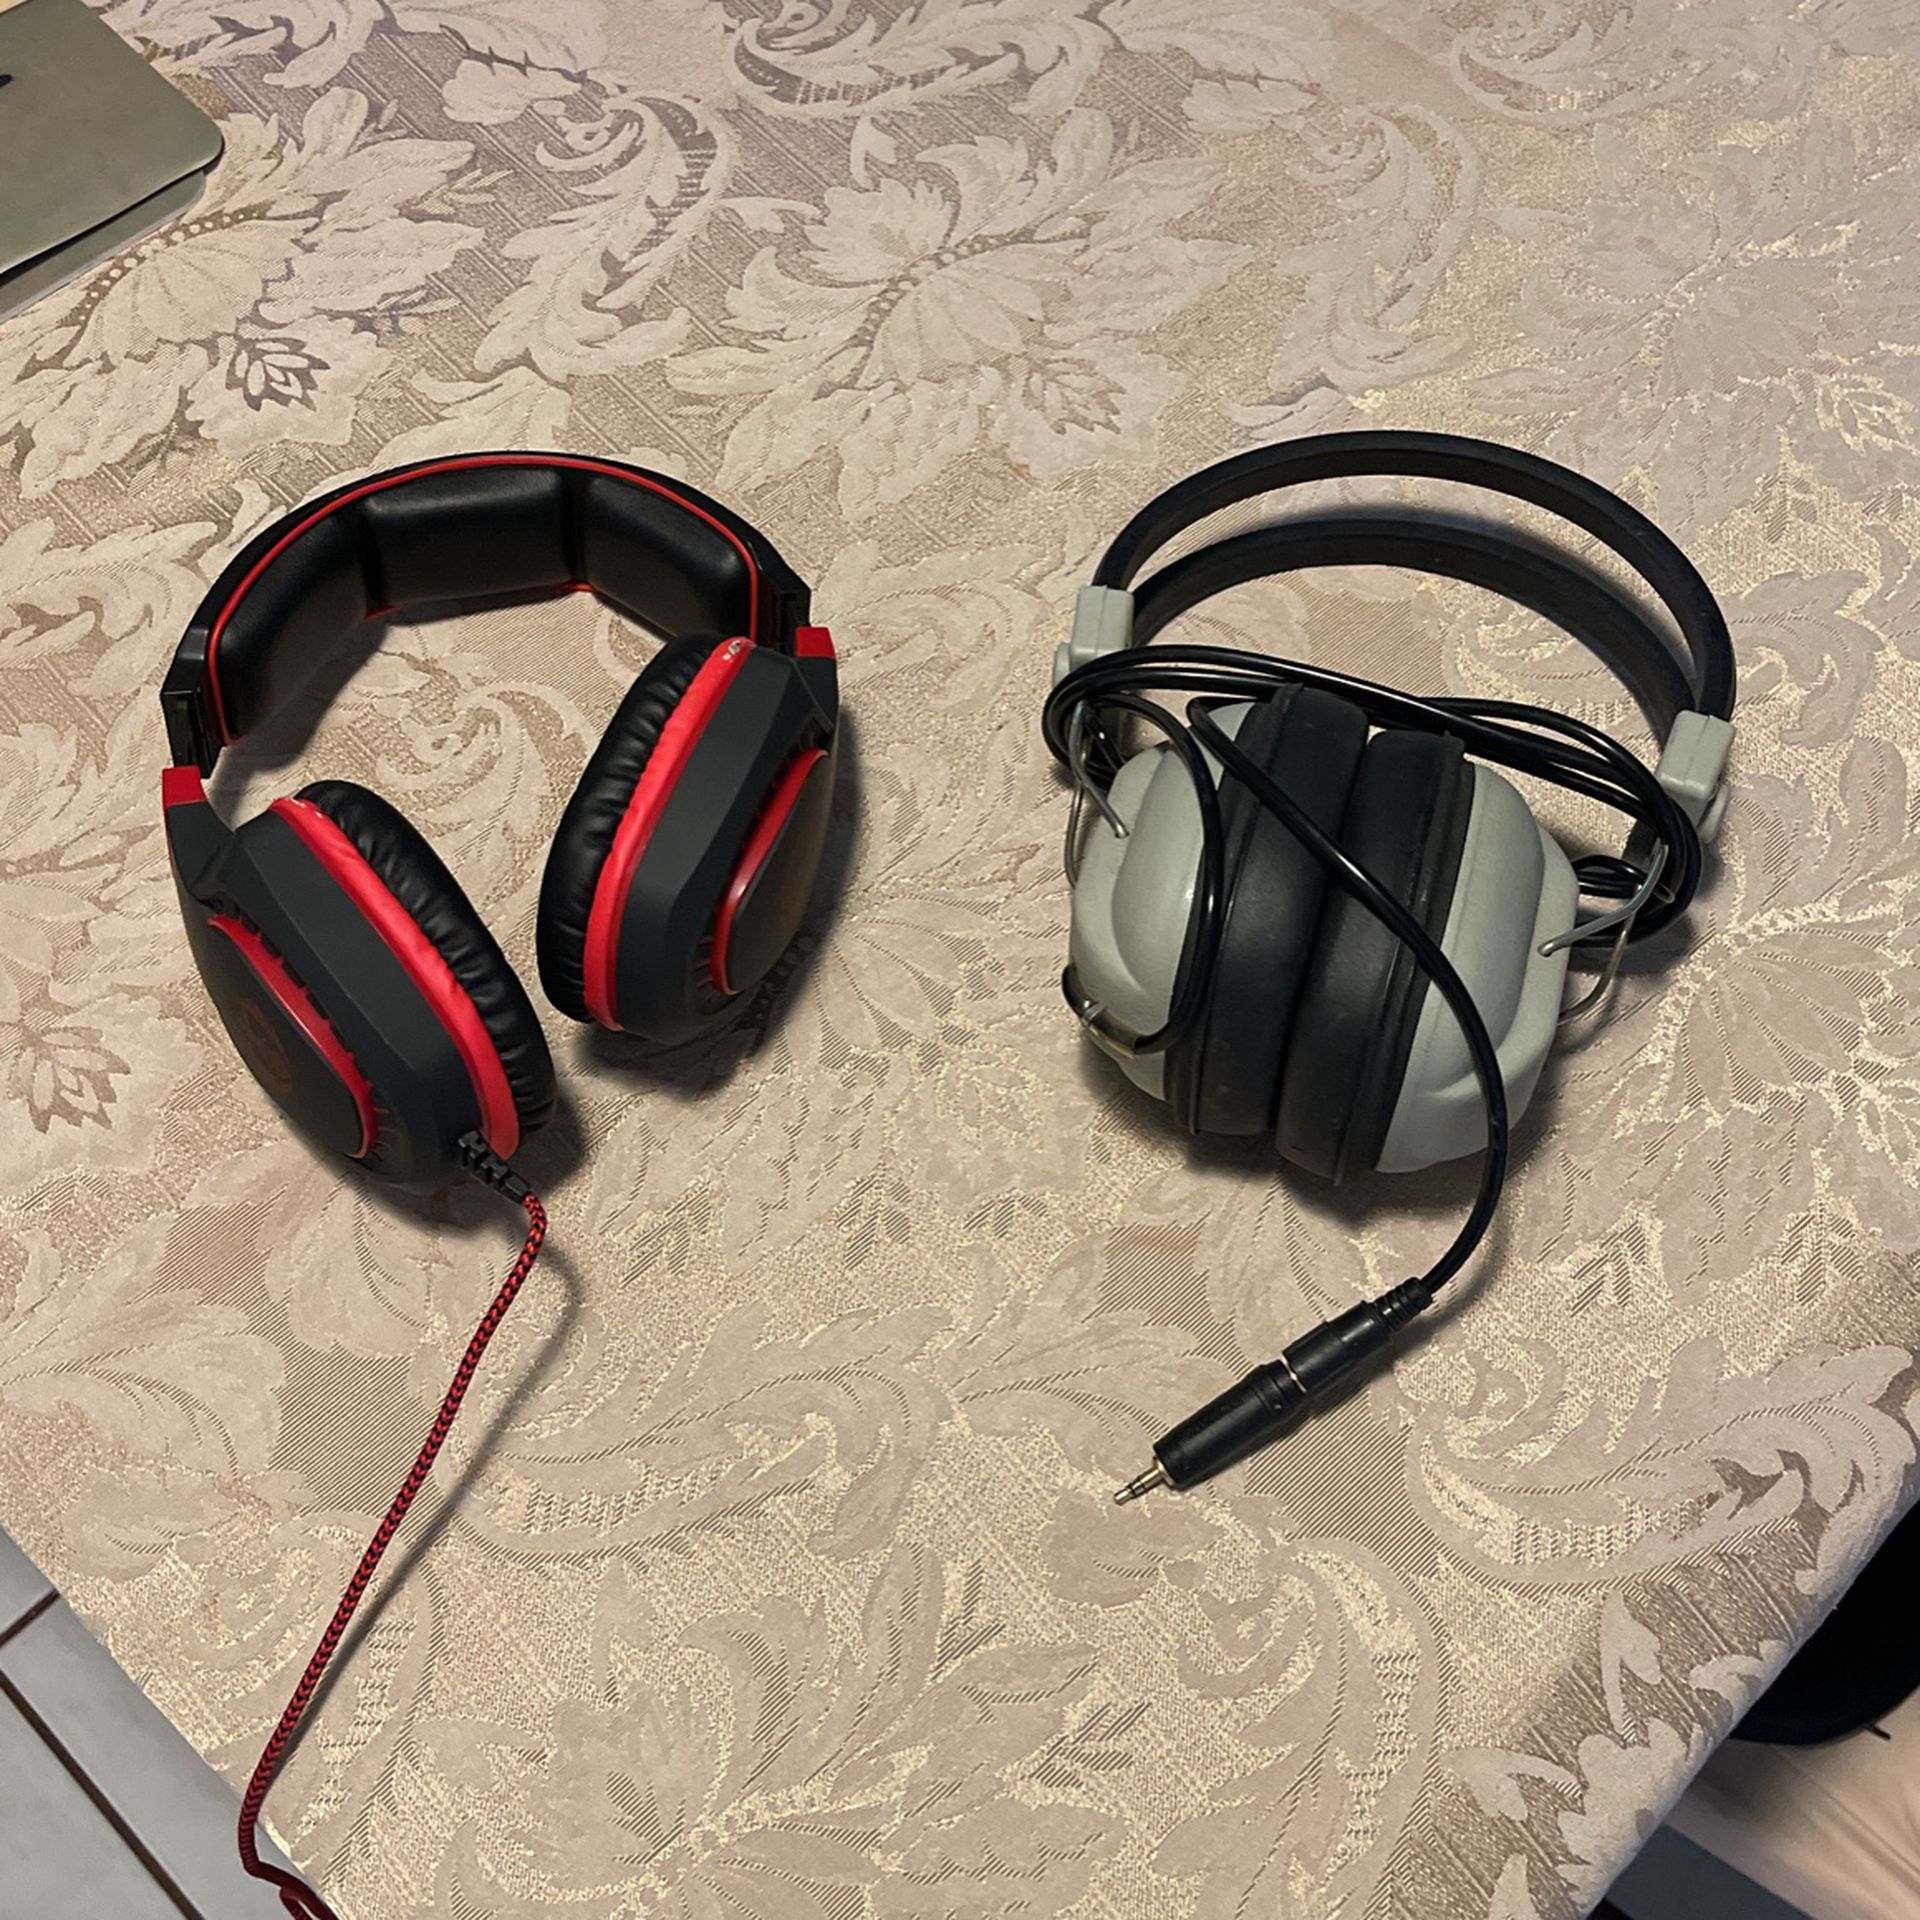 (2) Over The Head Headphones Both For $25